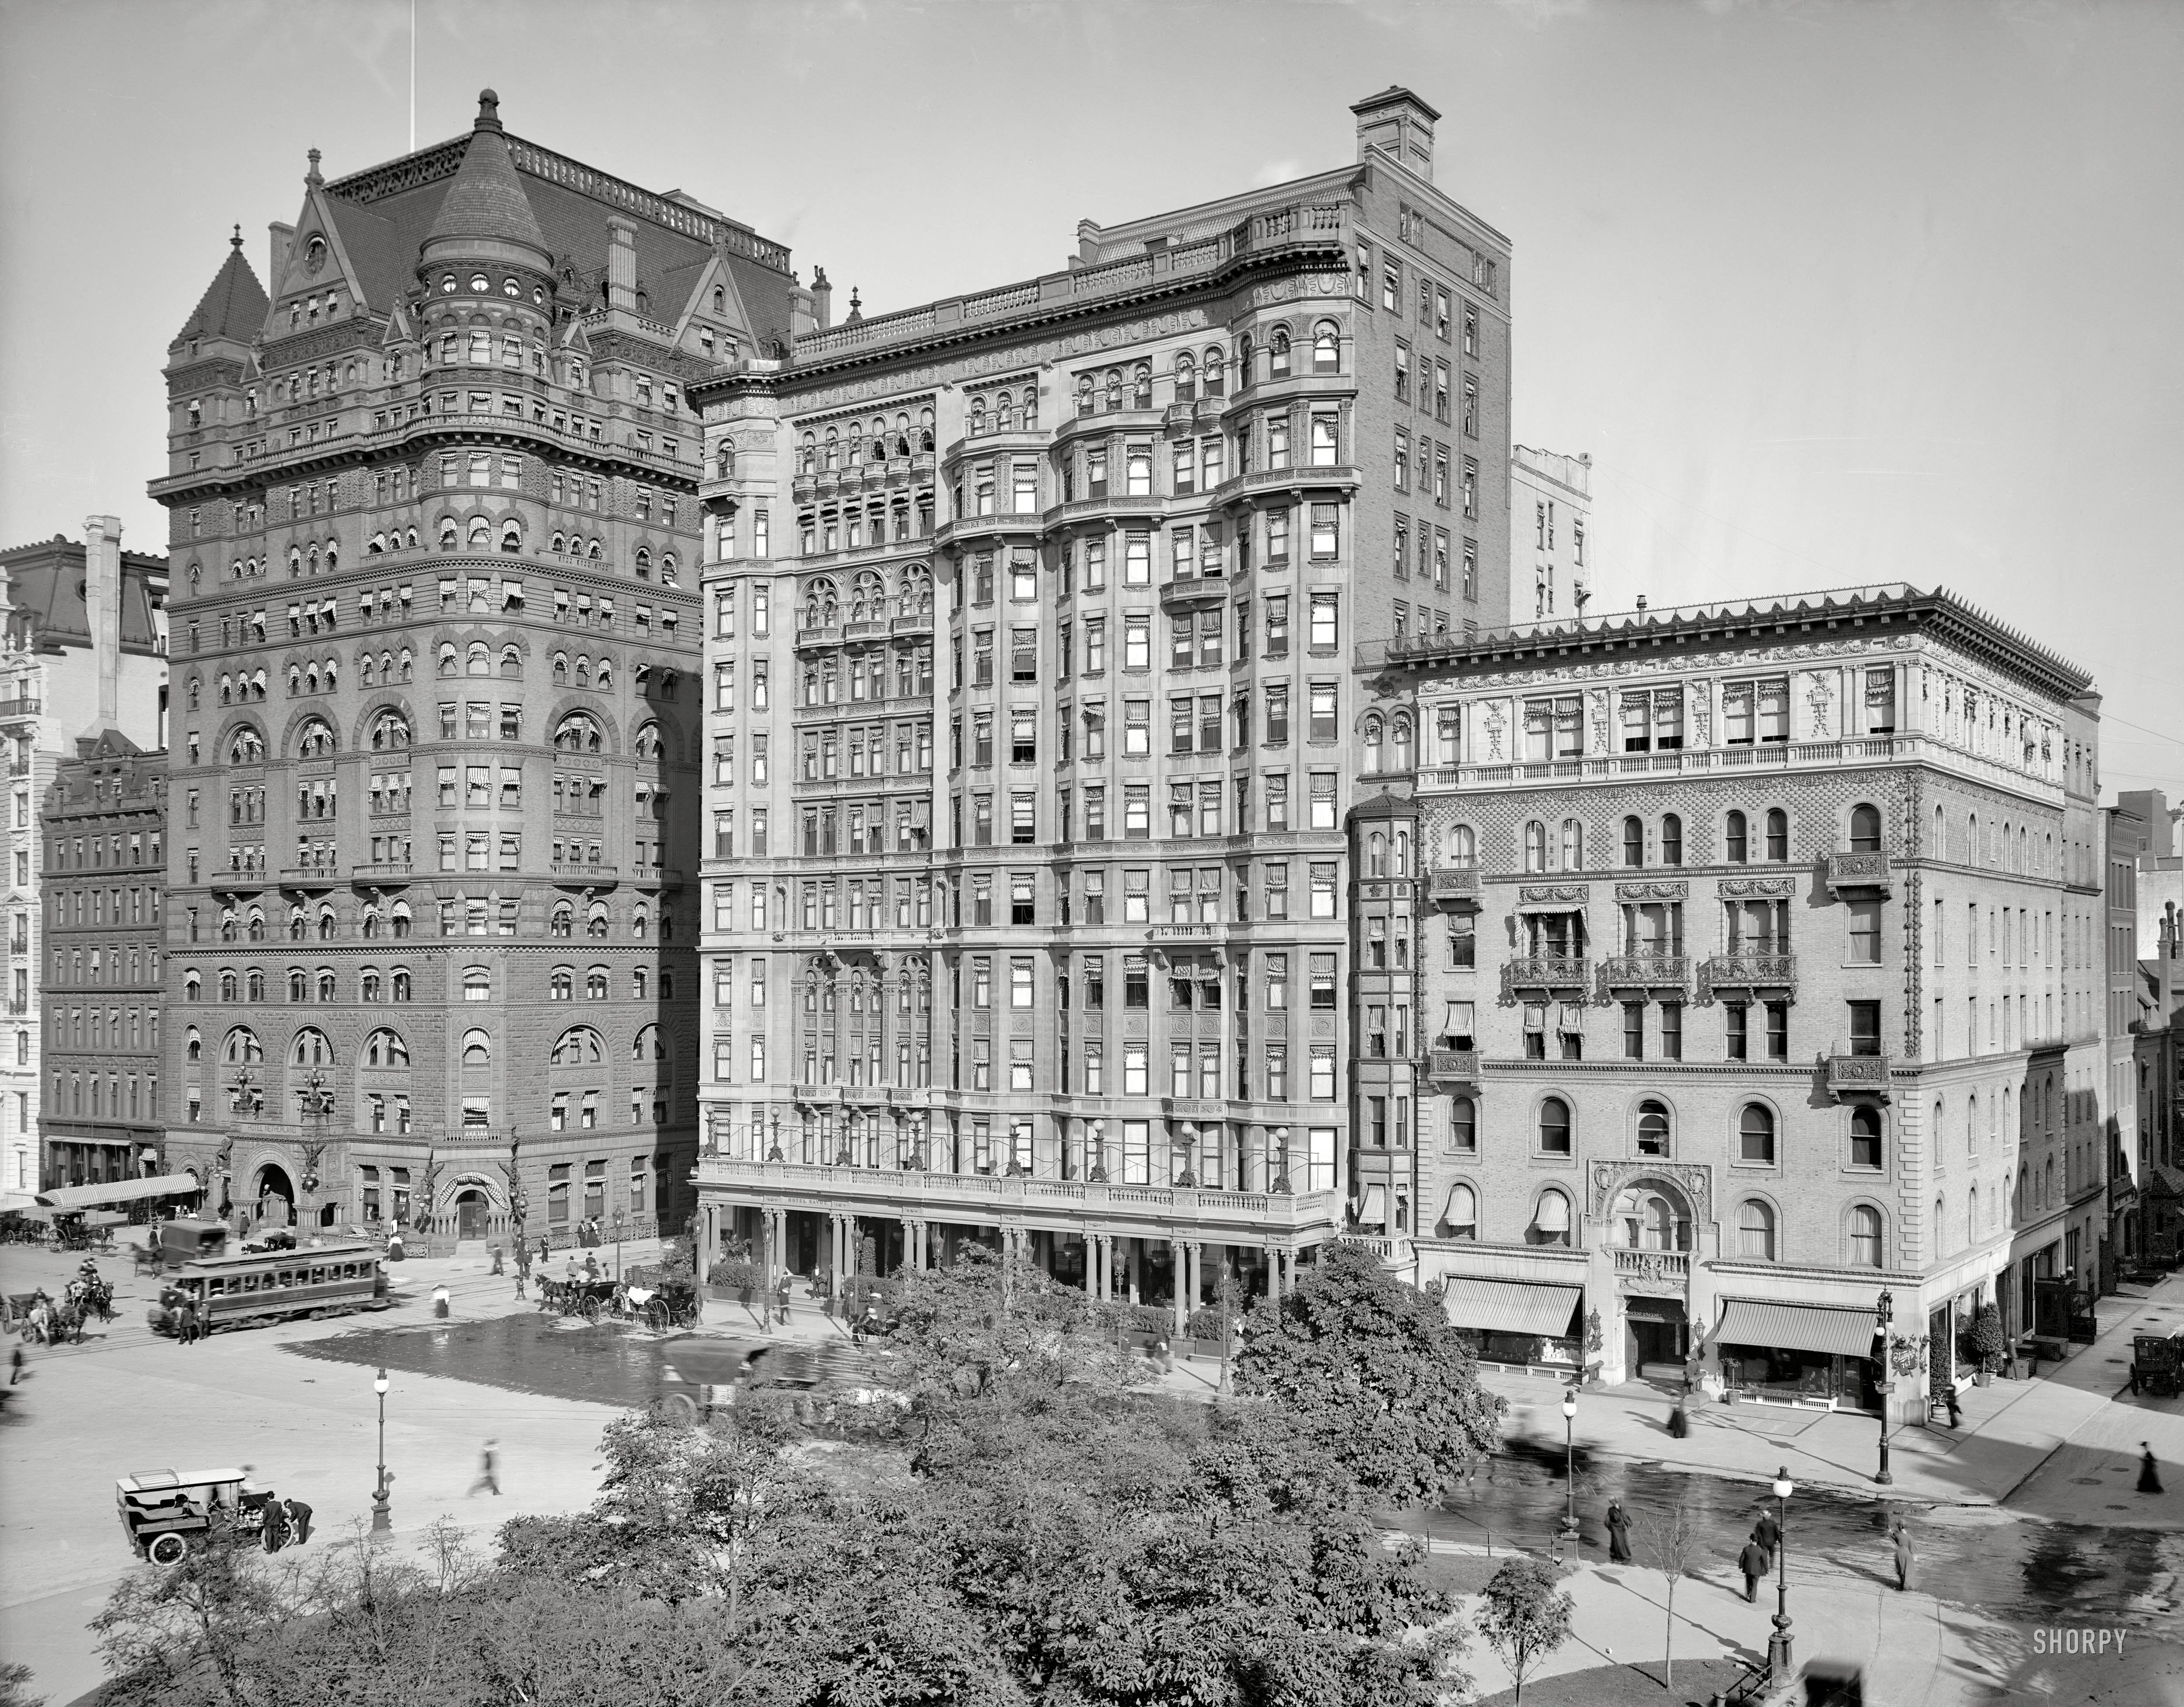 New York circa 1905. "Hotels Netherland and Savoy, Fifth Avenue and East 58th." 8x10 inch dry plate glass negative, Detroit Publishing Co. View full size.